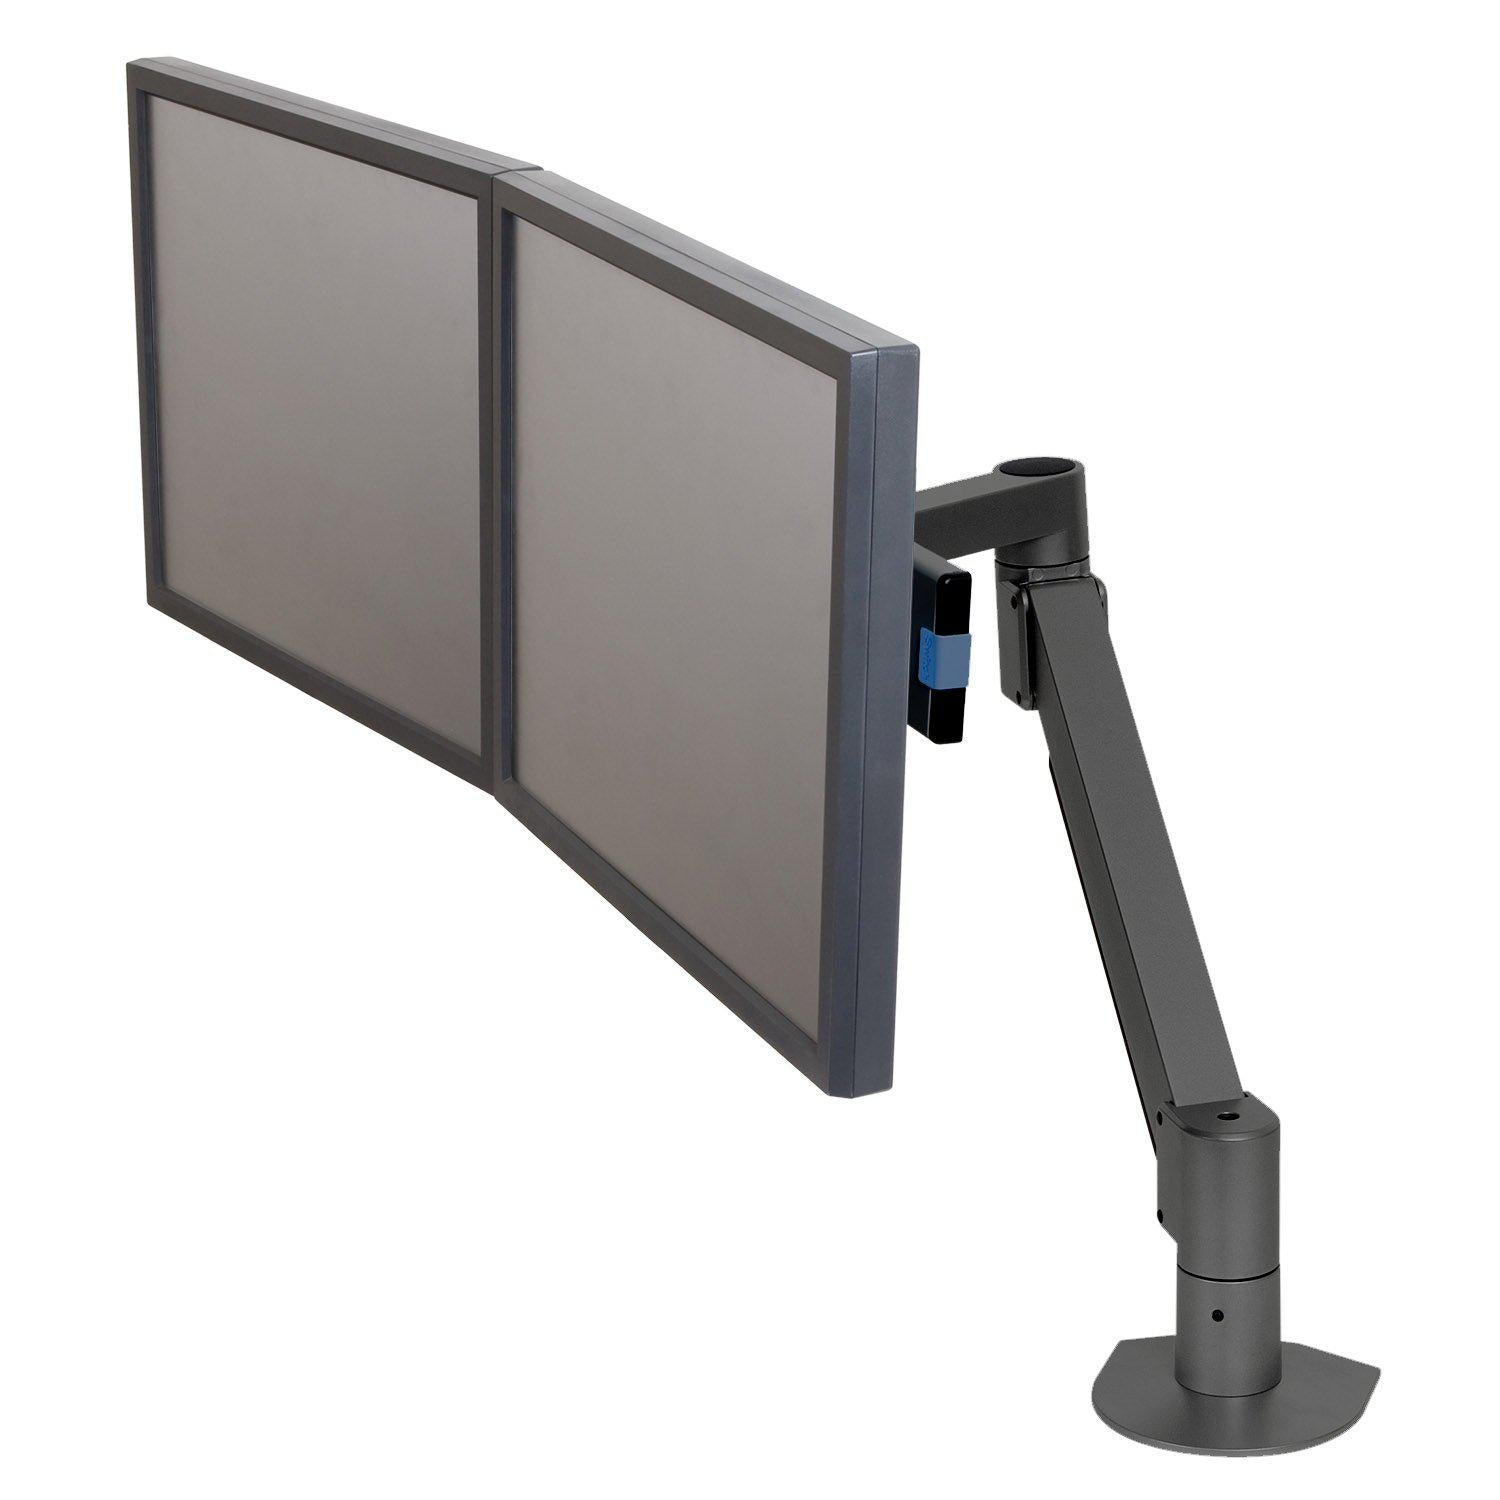 Dual Flat Panel Monitor Arm for Esports Gaming Desks and Shoutcaster Stations, FREE SHIPPING